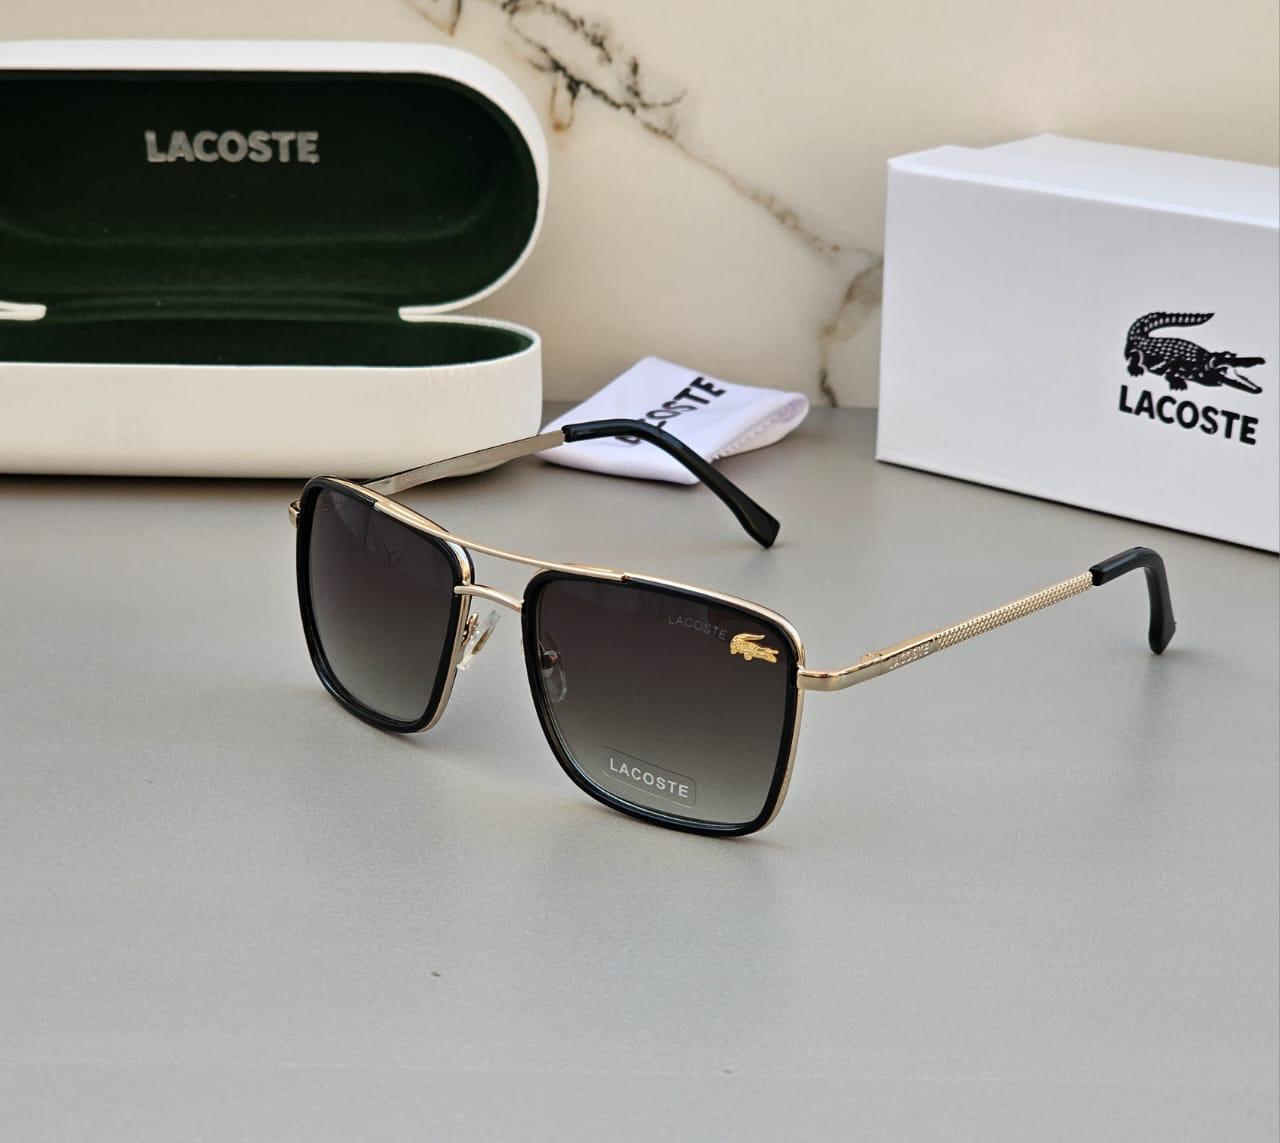 Top more than 179 lacoste sunglasses latest